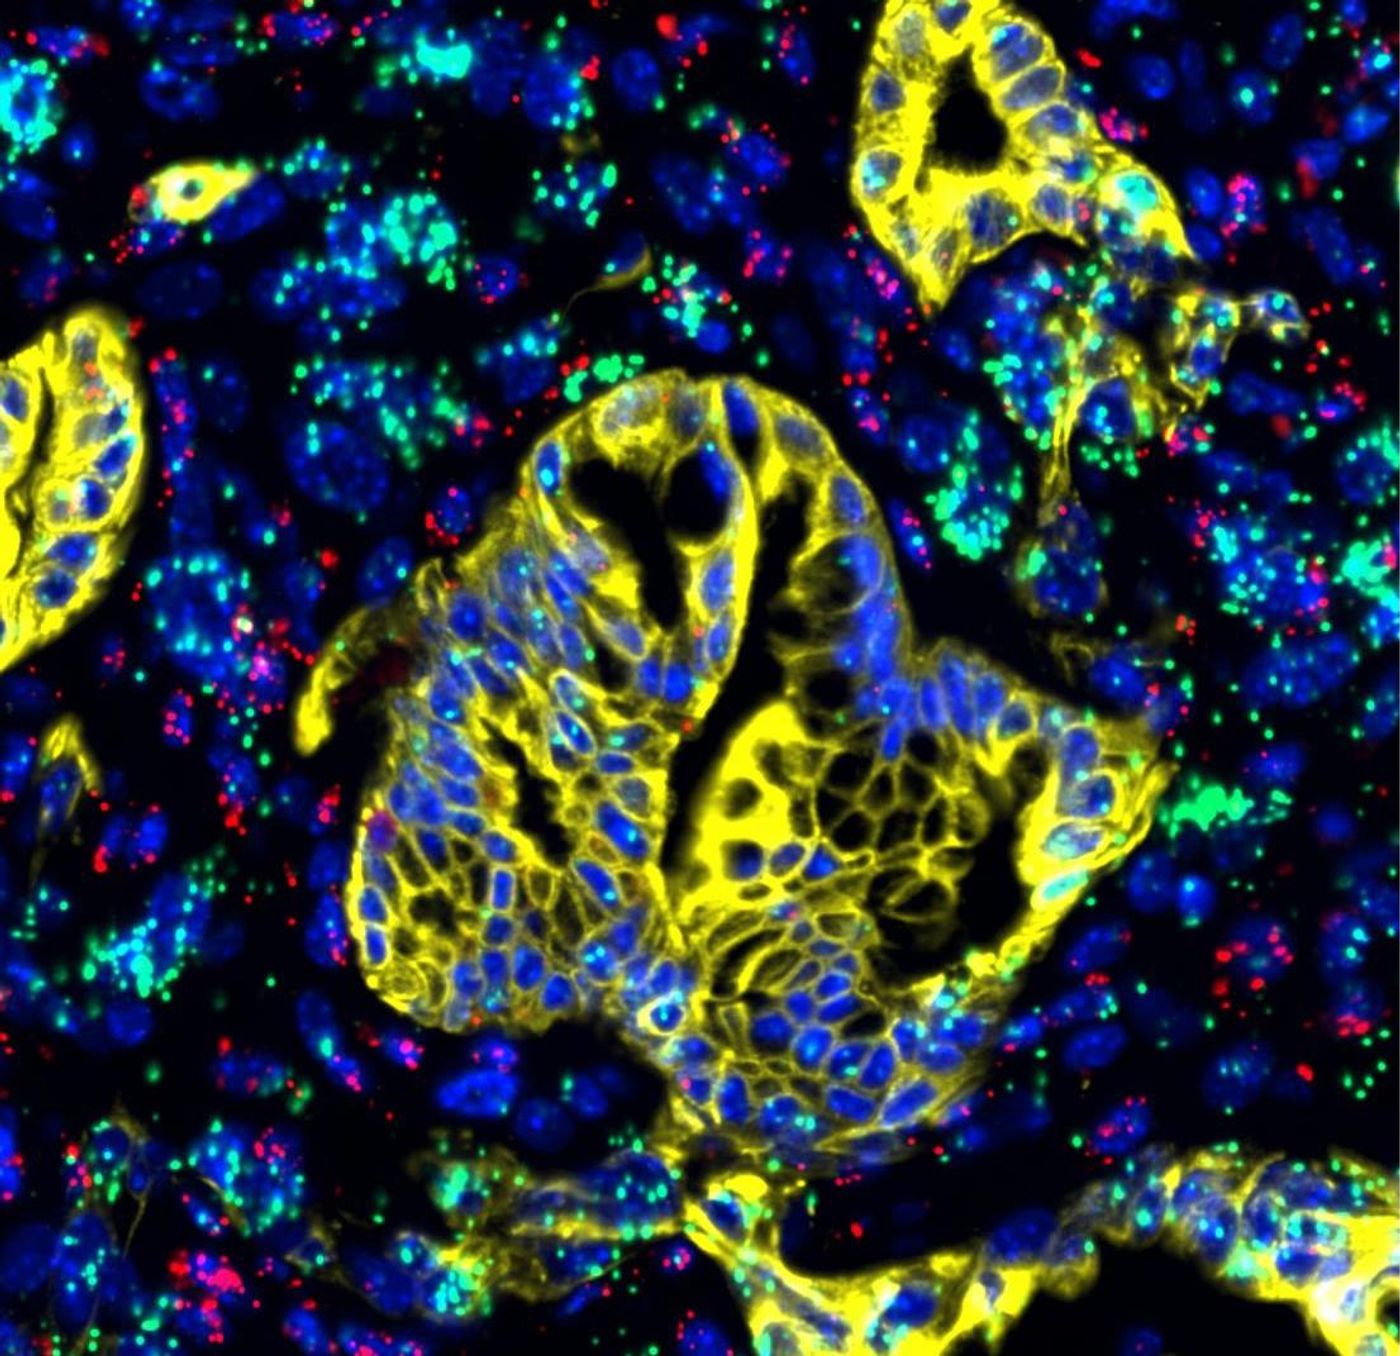 LIF (green), expressed mainly in activated pancreatic stellate cells, is shown along with immune cells (purple) and cancer cells (yellow) in pancreatic cancer tissue. / Credit: Salk Institute